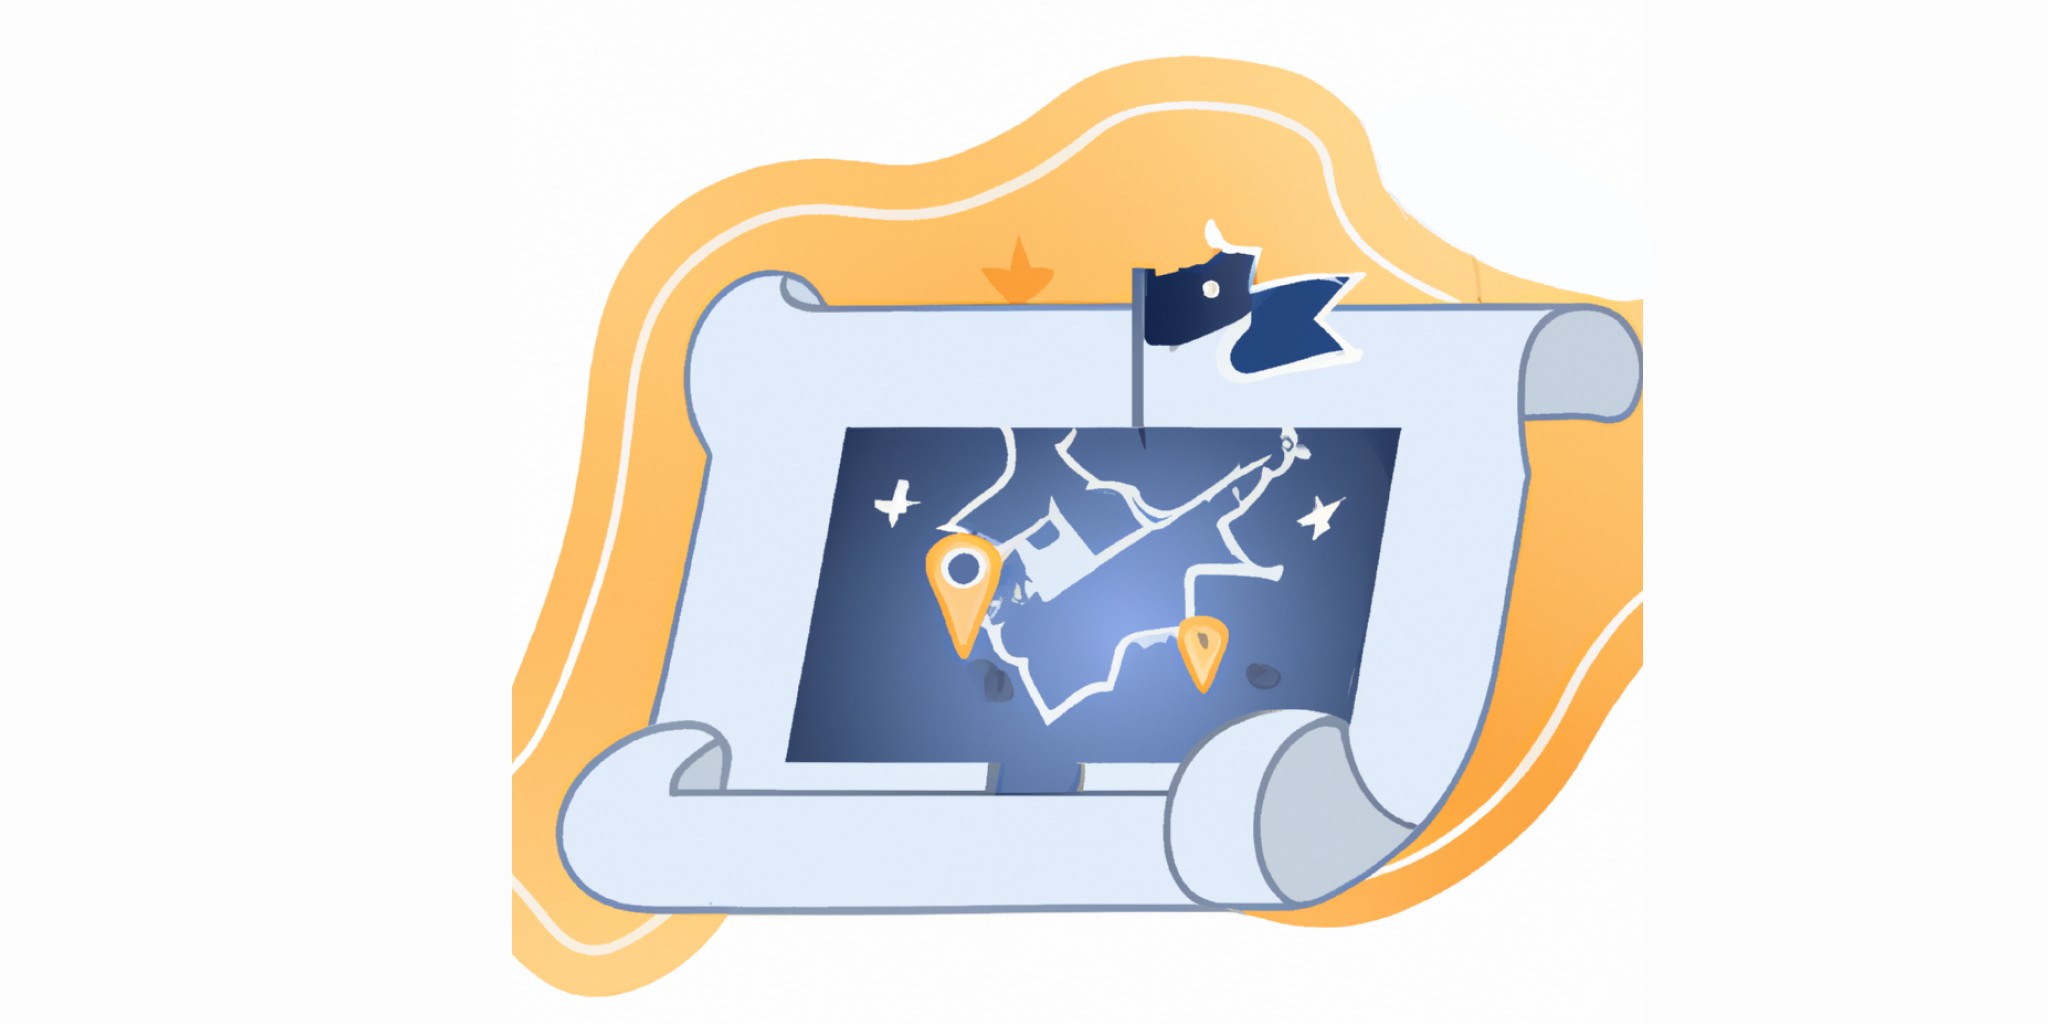 treasure map inside a computer screen in flat illustration style with gradients and white background